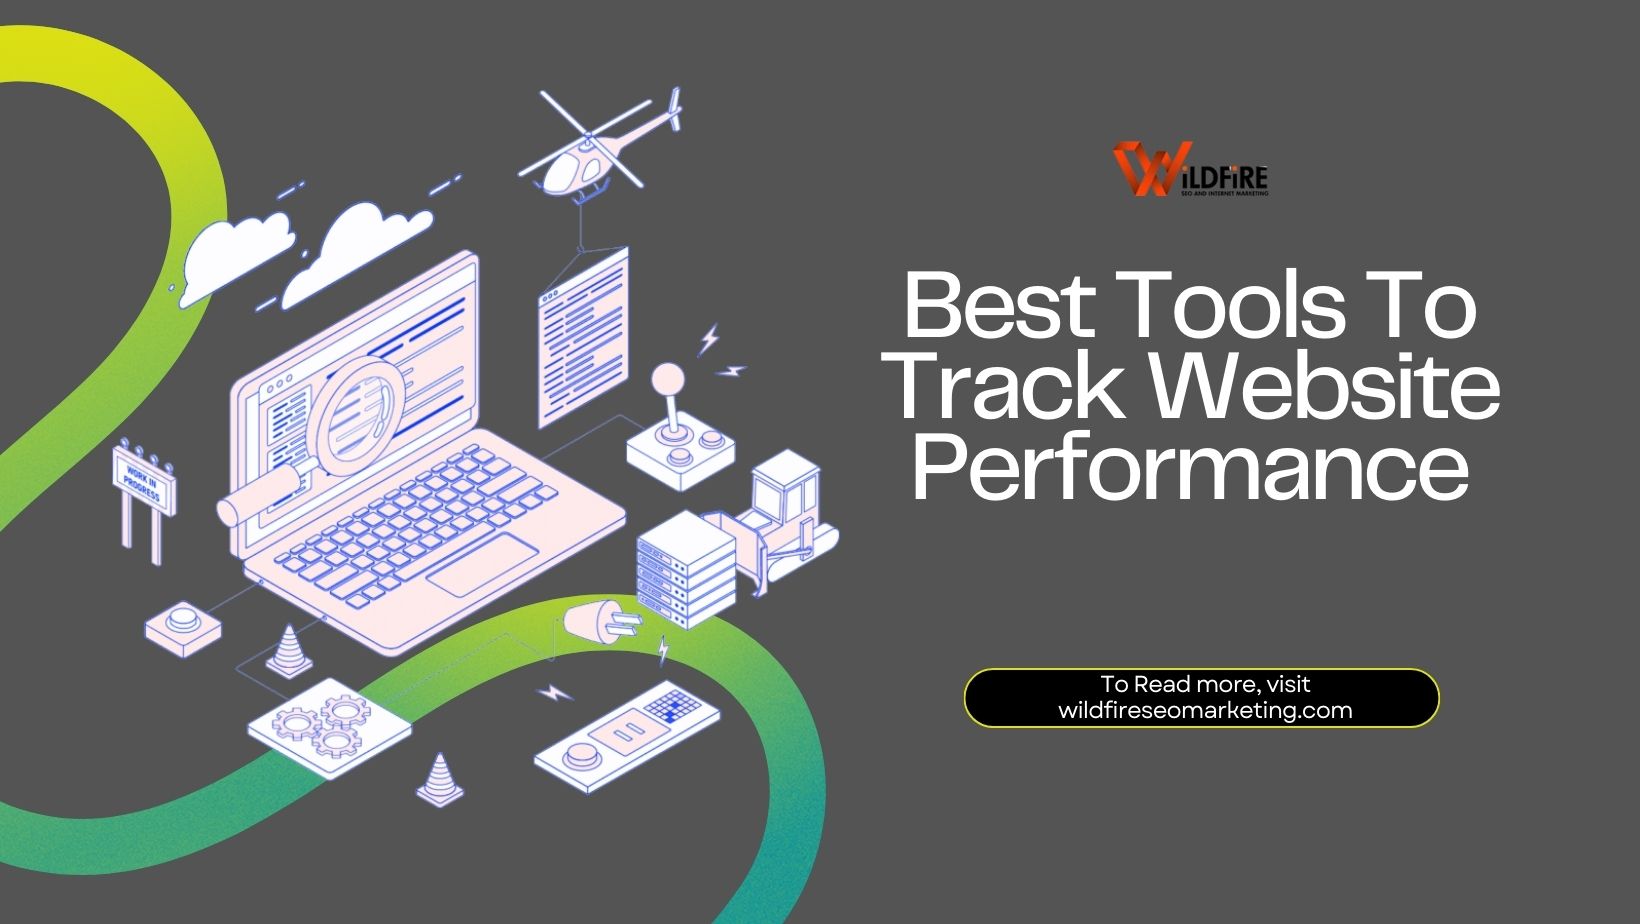 Best Tools To Track Website Performance